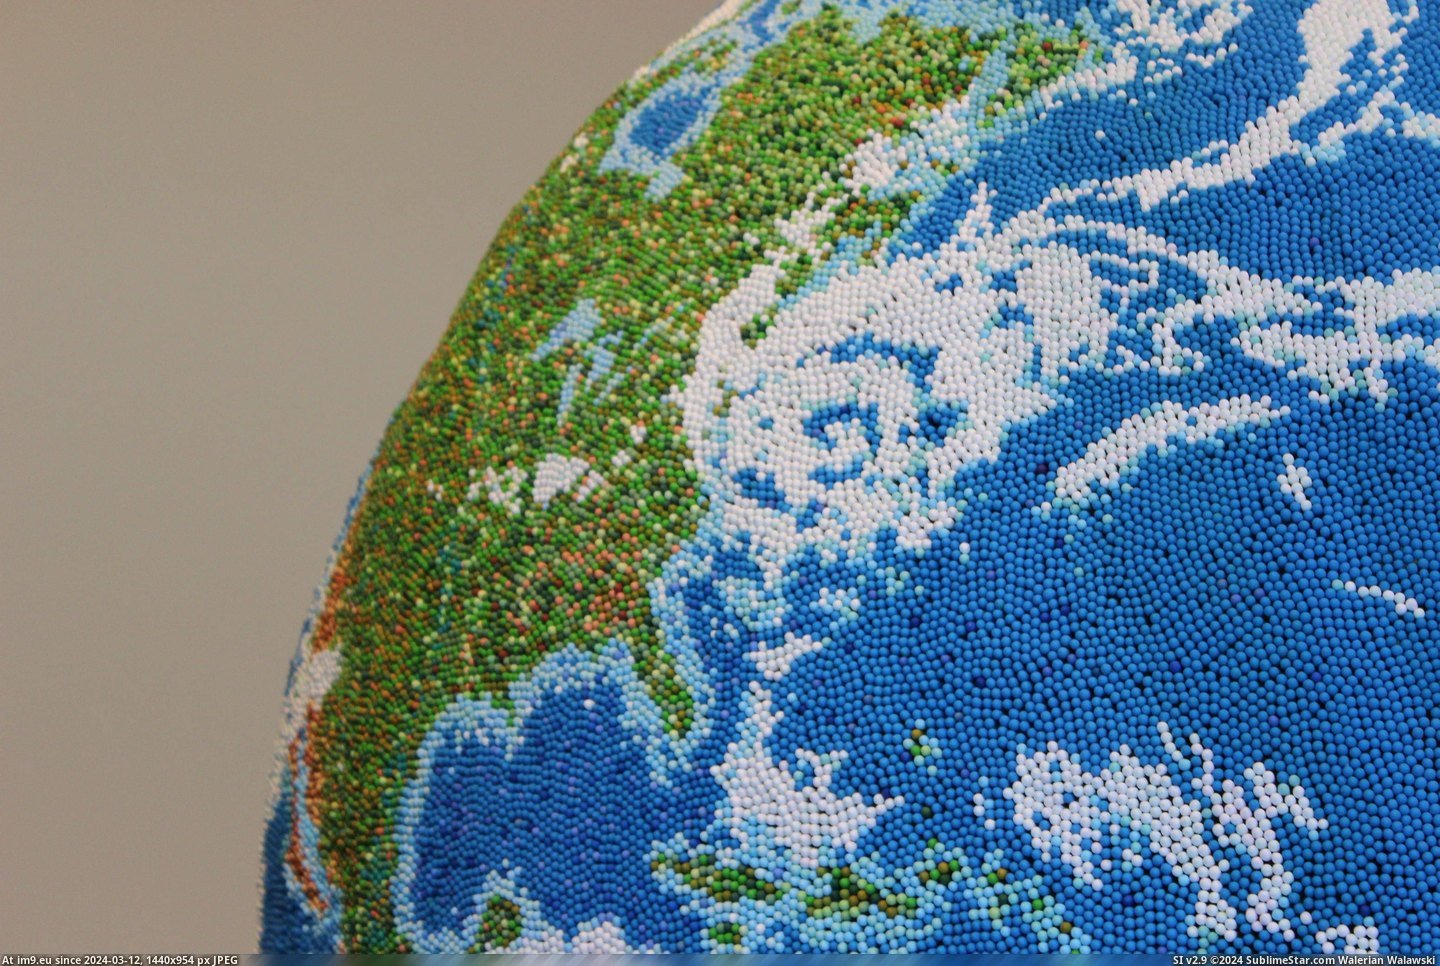 #Years #Making #Globe #Matches #Sculptor #Dad #Spent [Pics] My dad is a sculptor and has spent 2 years making this globe made entirely out of matches. 11 Pic. (Bild von album My r/PICS favs))